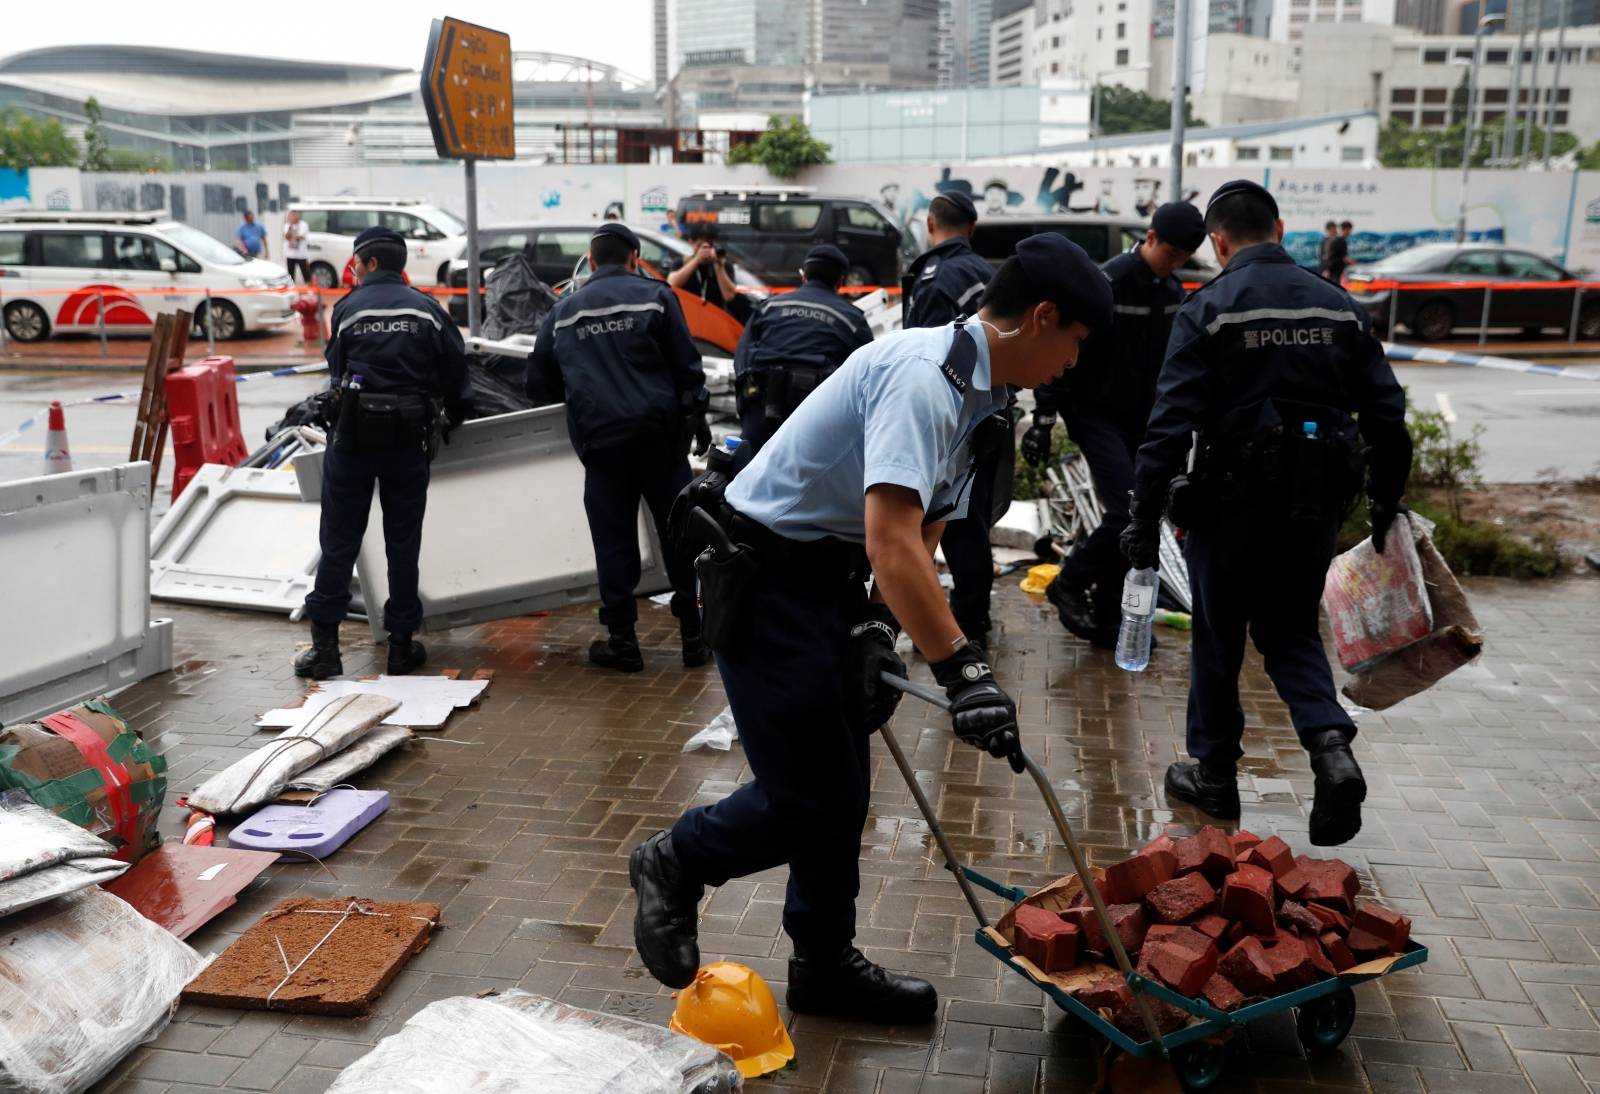 Police officers display objects used during a demonstration outside the Legislative complex in Hong Kong